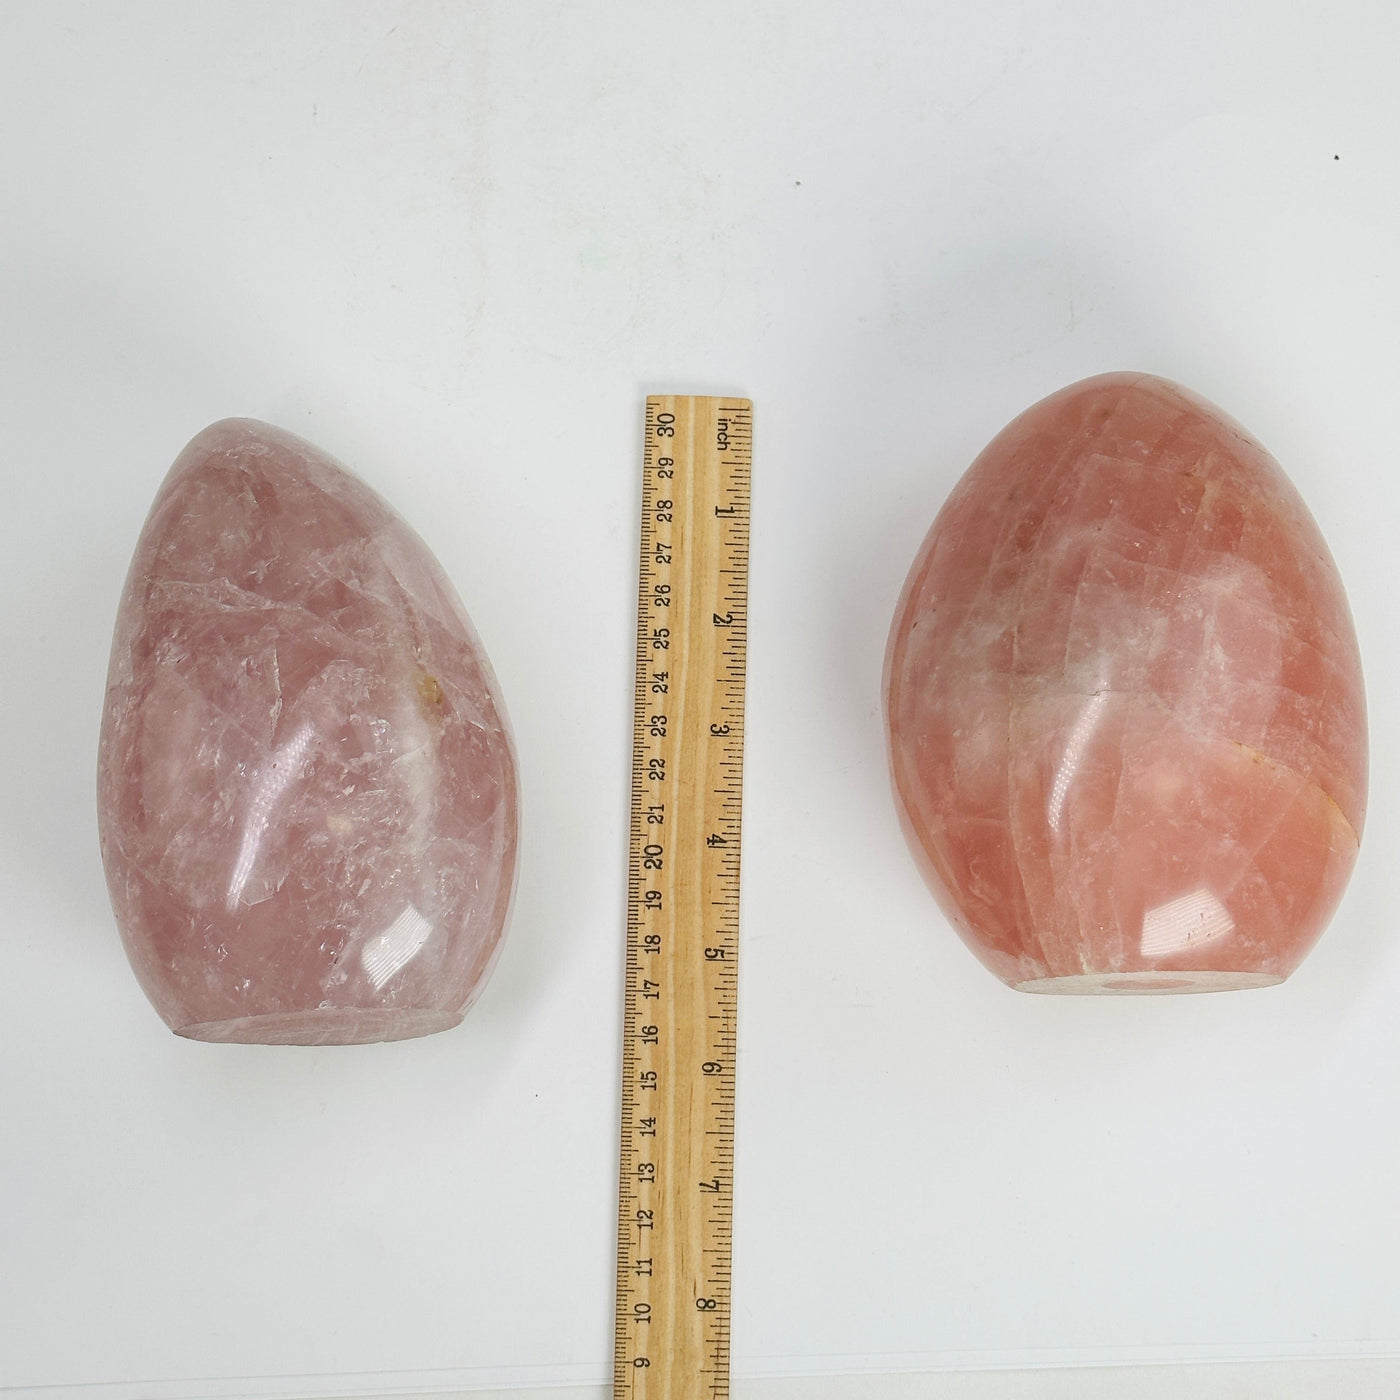 rose quartz polished cutbases next to a ruler for size reference